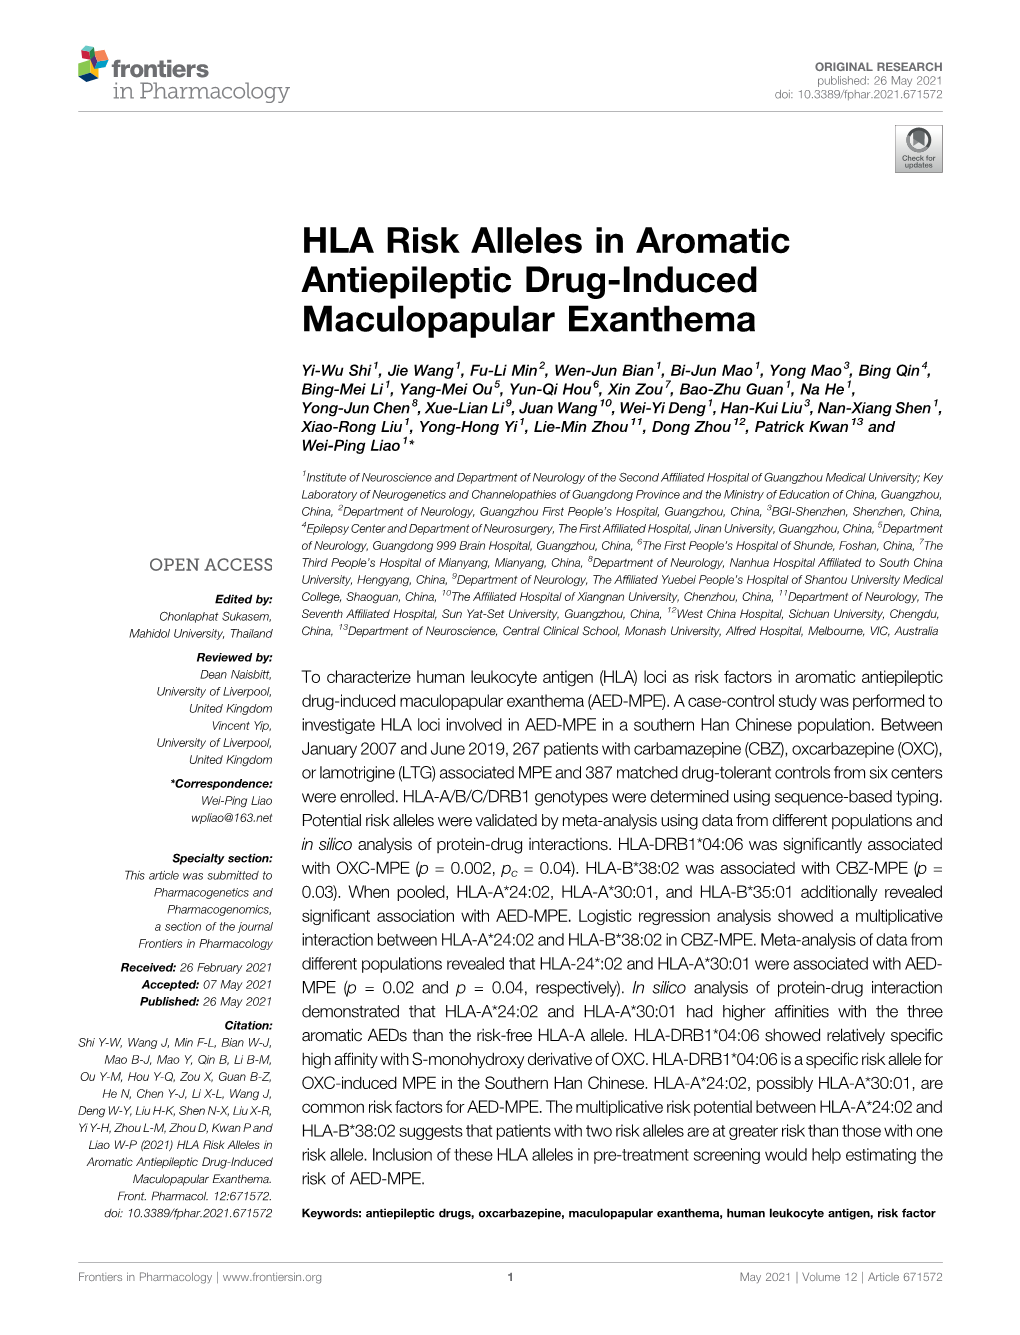 HLA Risk Alleles in Aromatic Antiepileptic Drug-Induced Maculopapular Exanthema